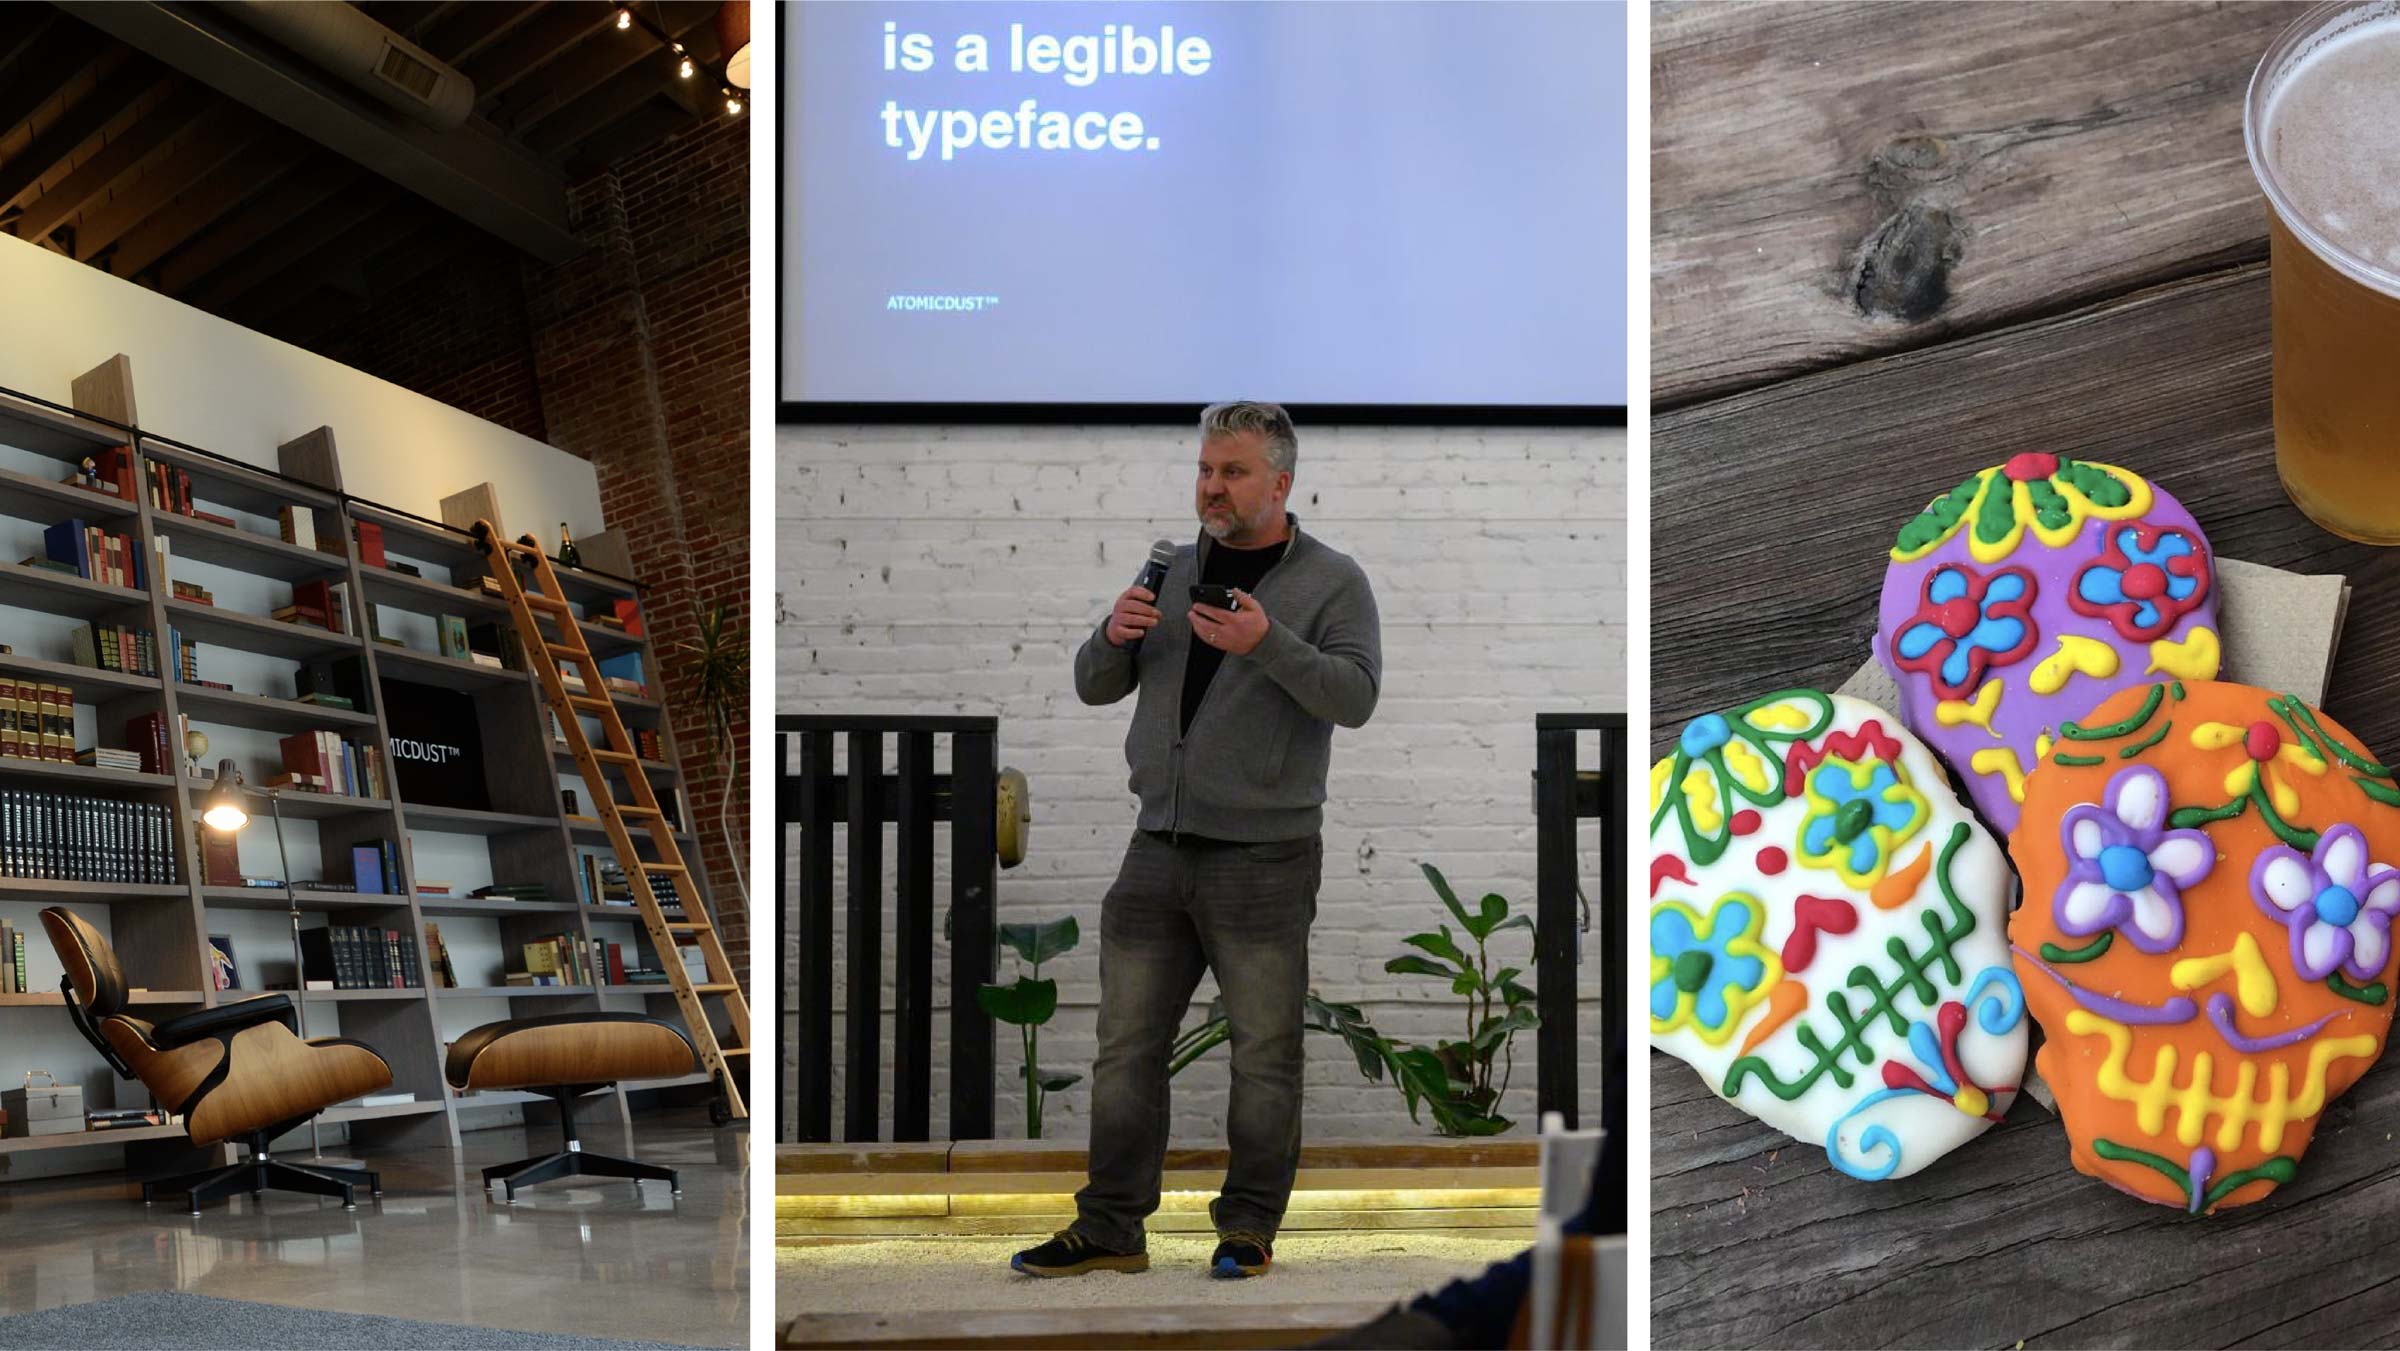 Atomicdust will be hosting and participating in three events for St. Louis Design Week 2022, including an agency tour, talk by Mike Spakowski and Cherokee Street event